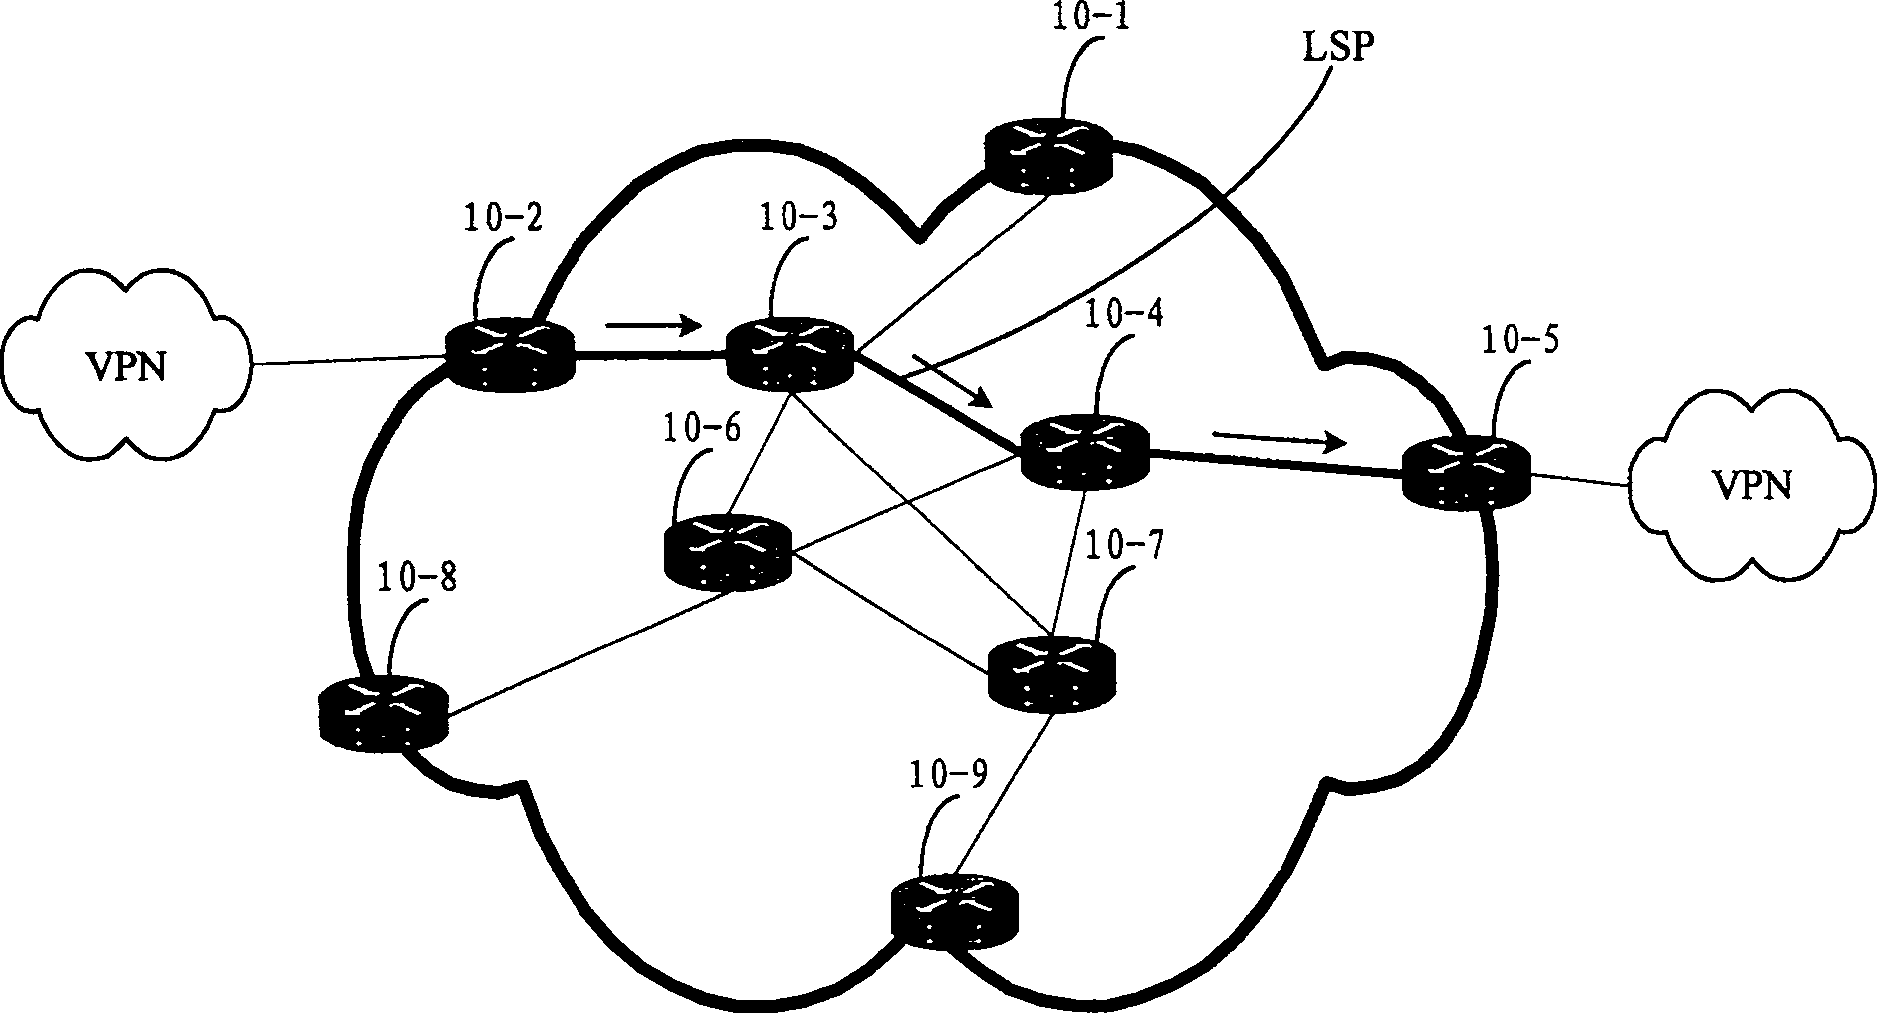 Method for implement virtual leased line